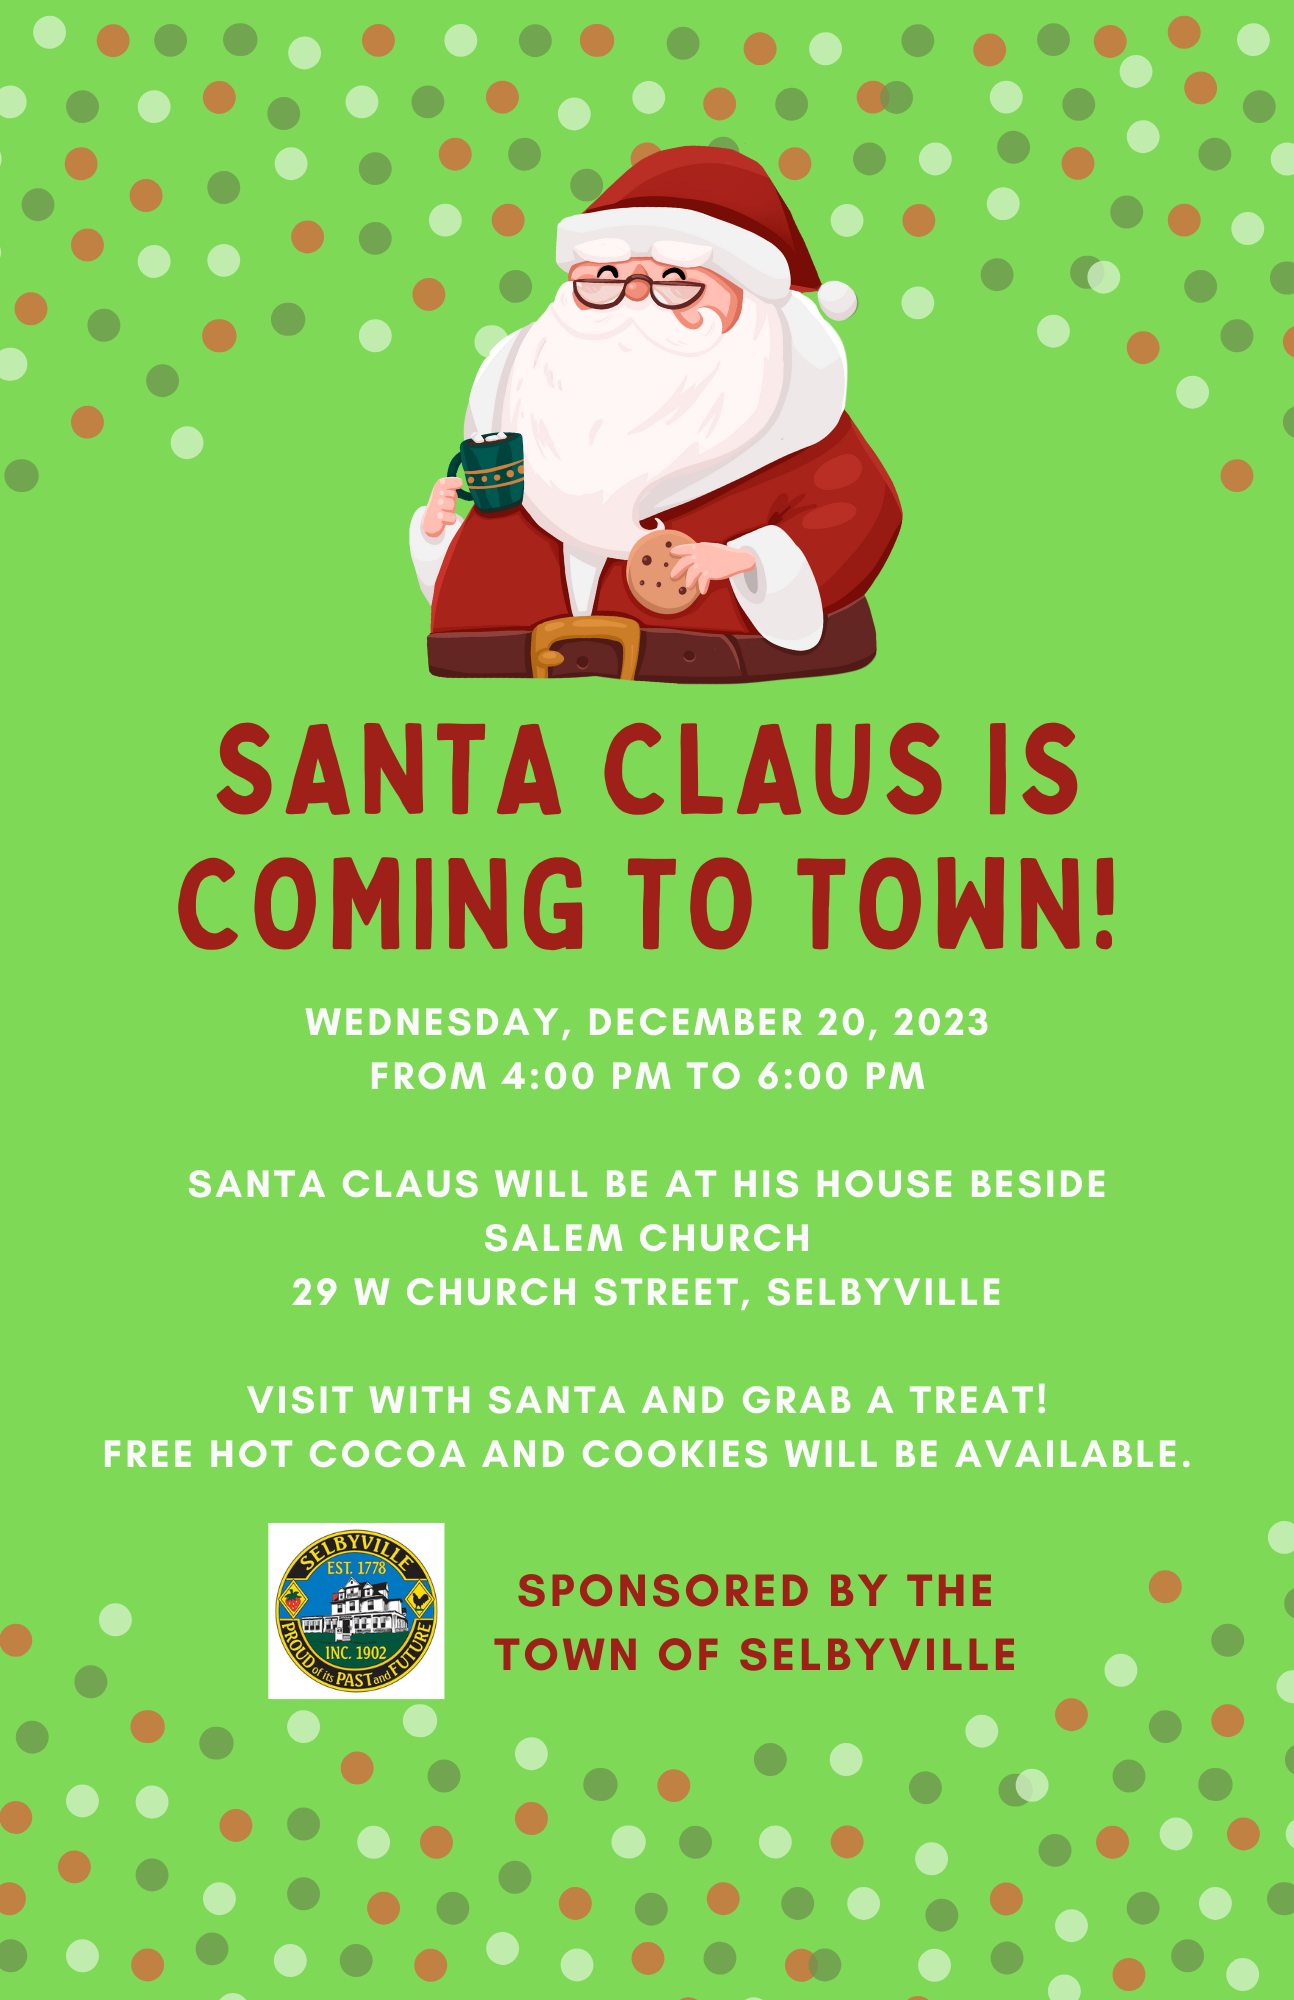 Santa will be at the Santa House beside Salem Church on Wednesday, December 20, 2023, from 4:00 PM to 6:00 PM